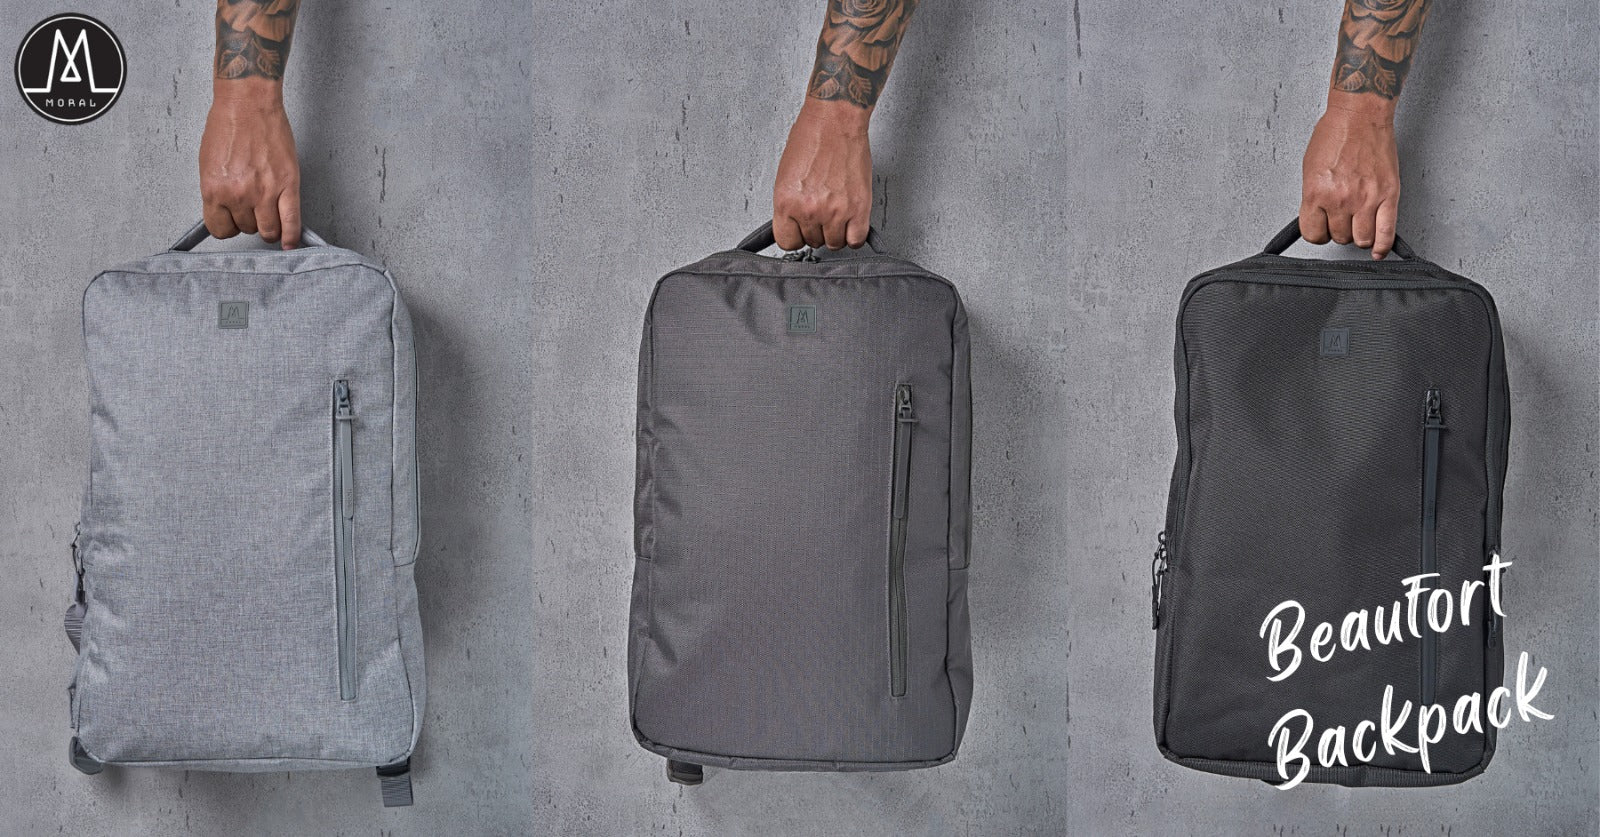 【A simple and practical backpack for work - Moral’s Beaufort, Perfect for work and travel!】